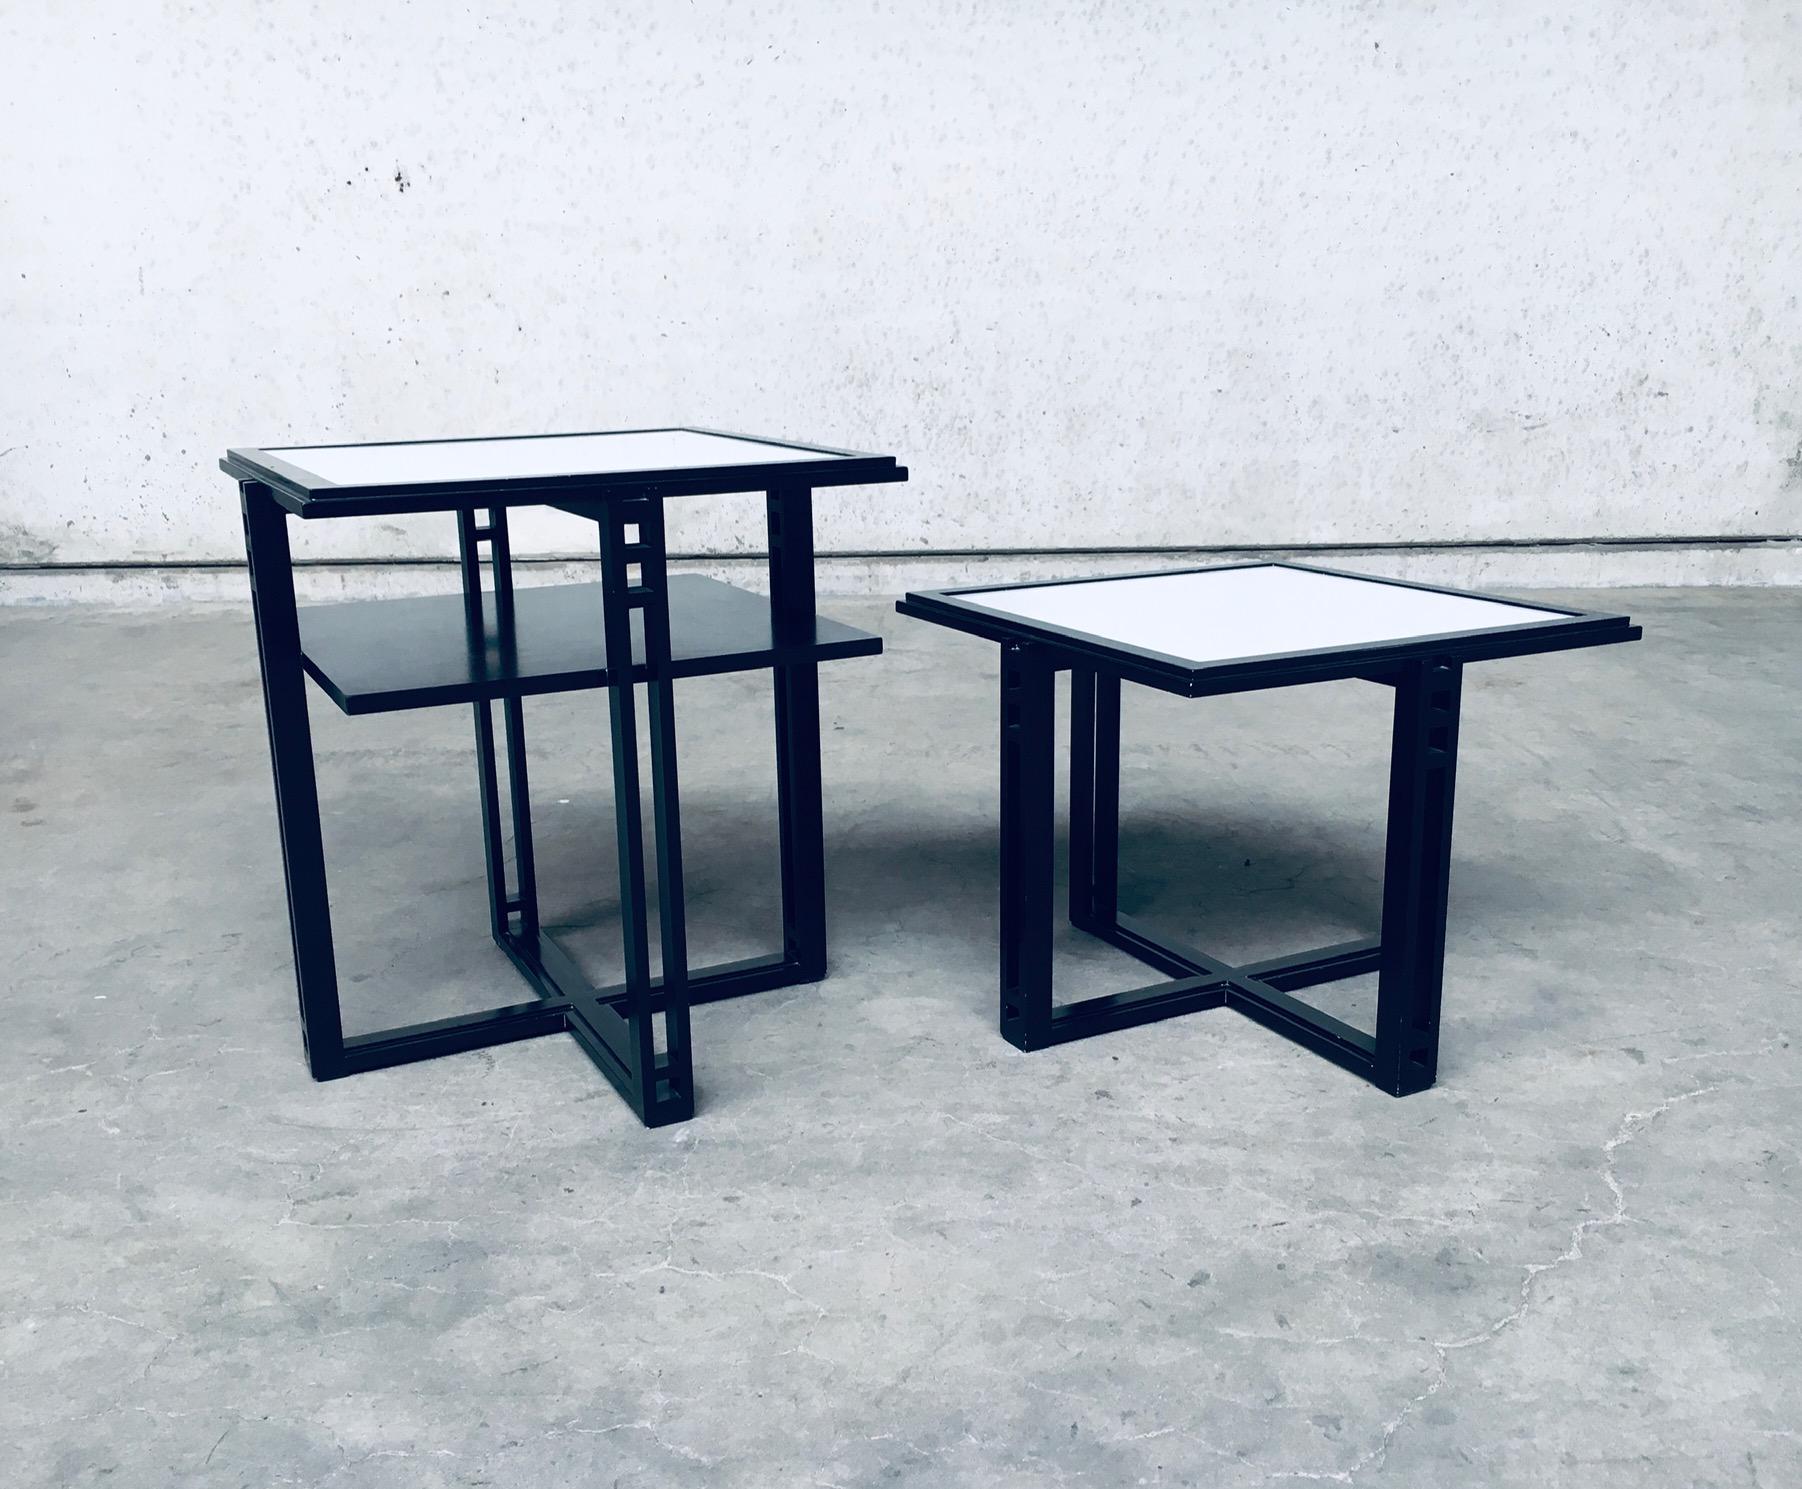 Postmodern Italian Design 'Galaxy' series square Side Table set of 2 by Umberto Asnago for Giorgetti, made in Italy 1980's. Black laquered wooden frame with white glass inlay on top. Higher two tier model and lower single model. Both are in very